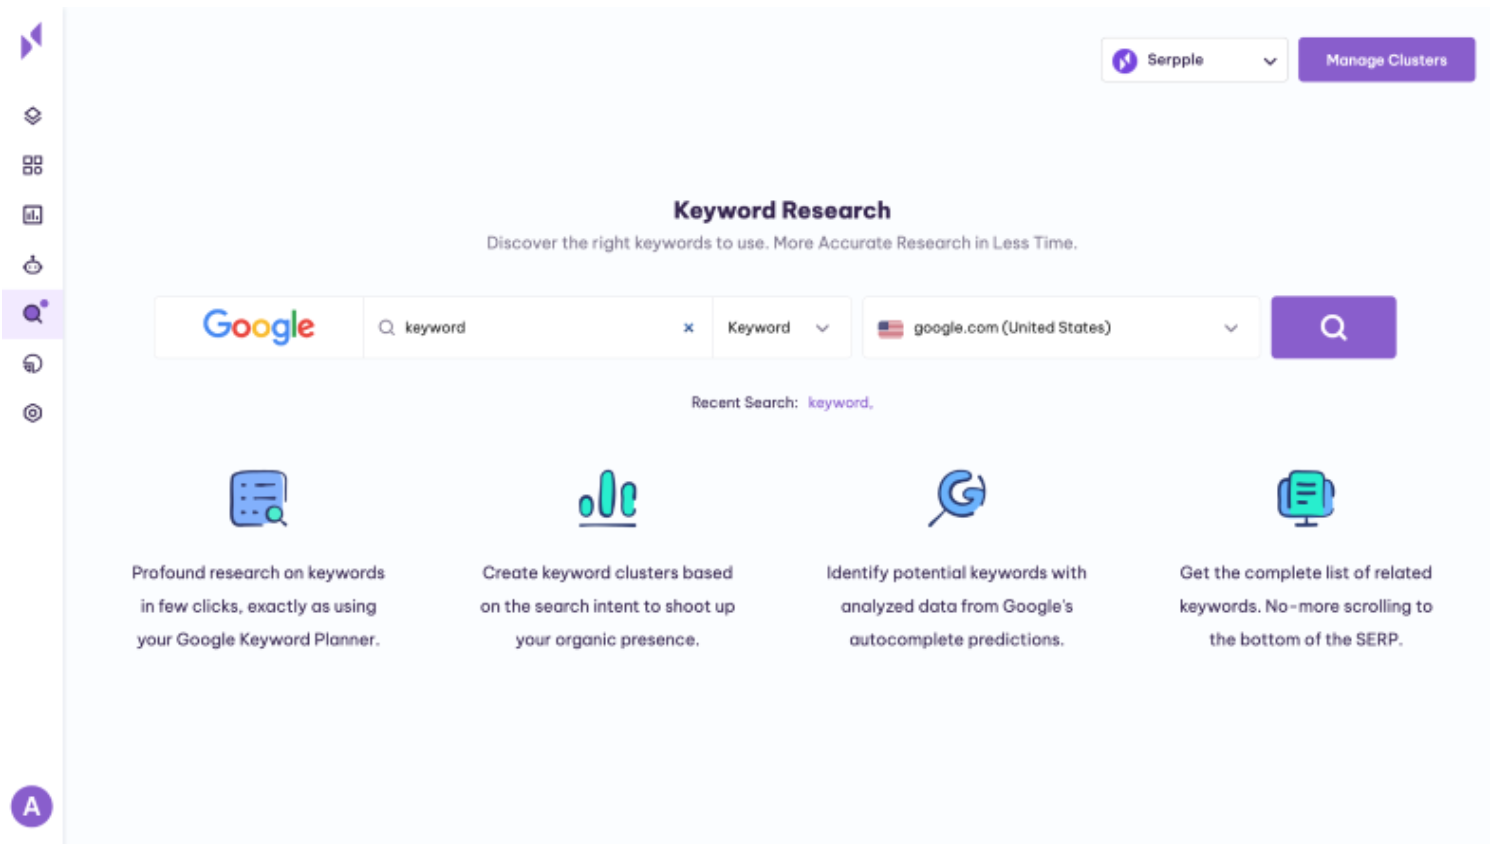 entering a keyword you want to to keyword research for on serpple